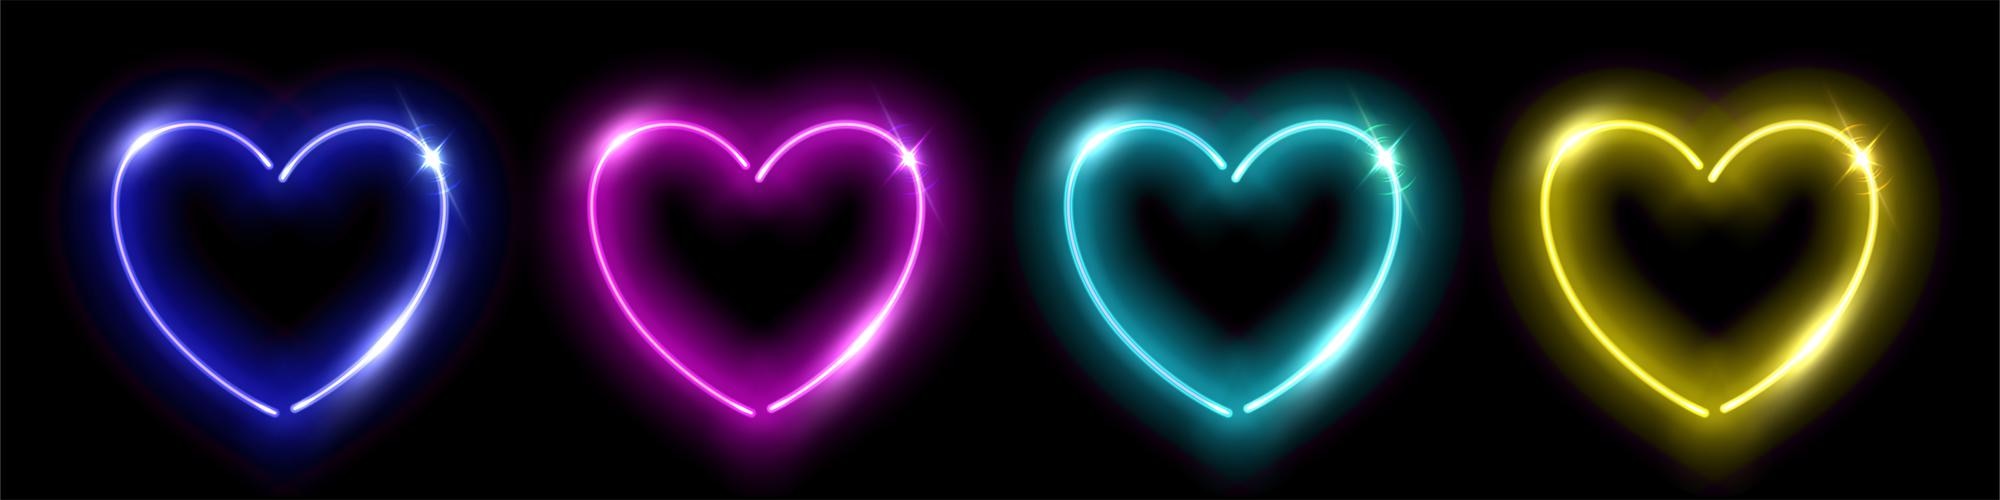 Free Vector. Neon hearts love symbol of valentines day vector illustration set glowing objects from led wires frames with bright blue purple yellow green lines for nightclub isolated on black background